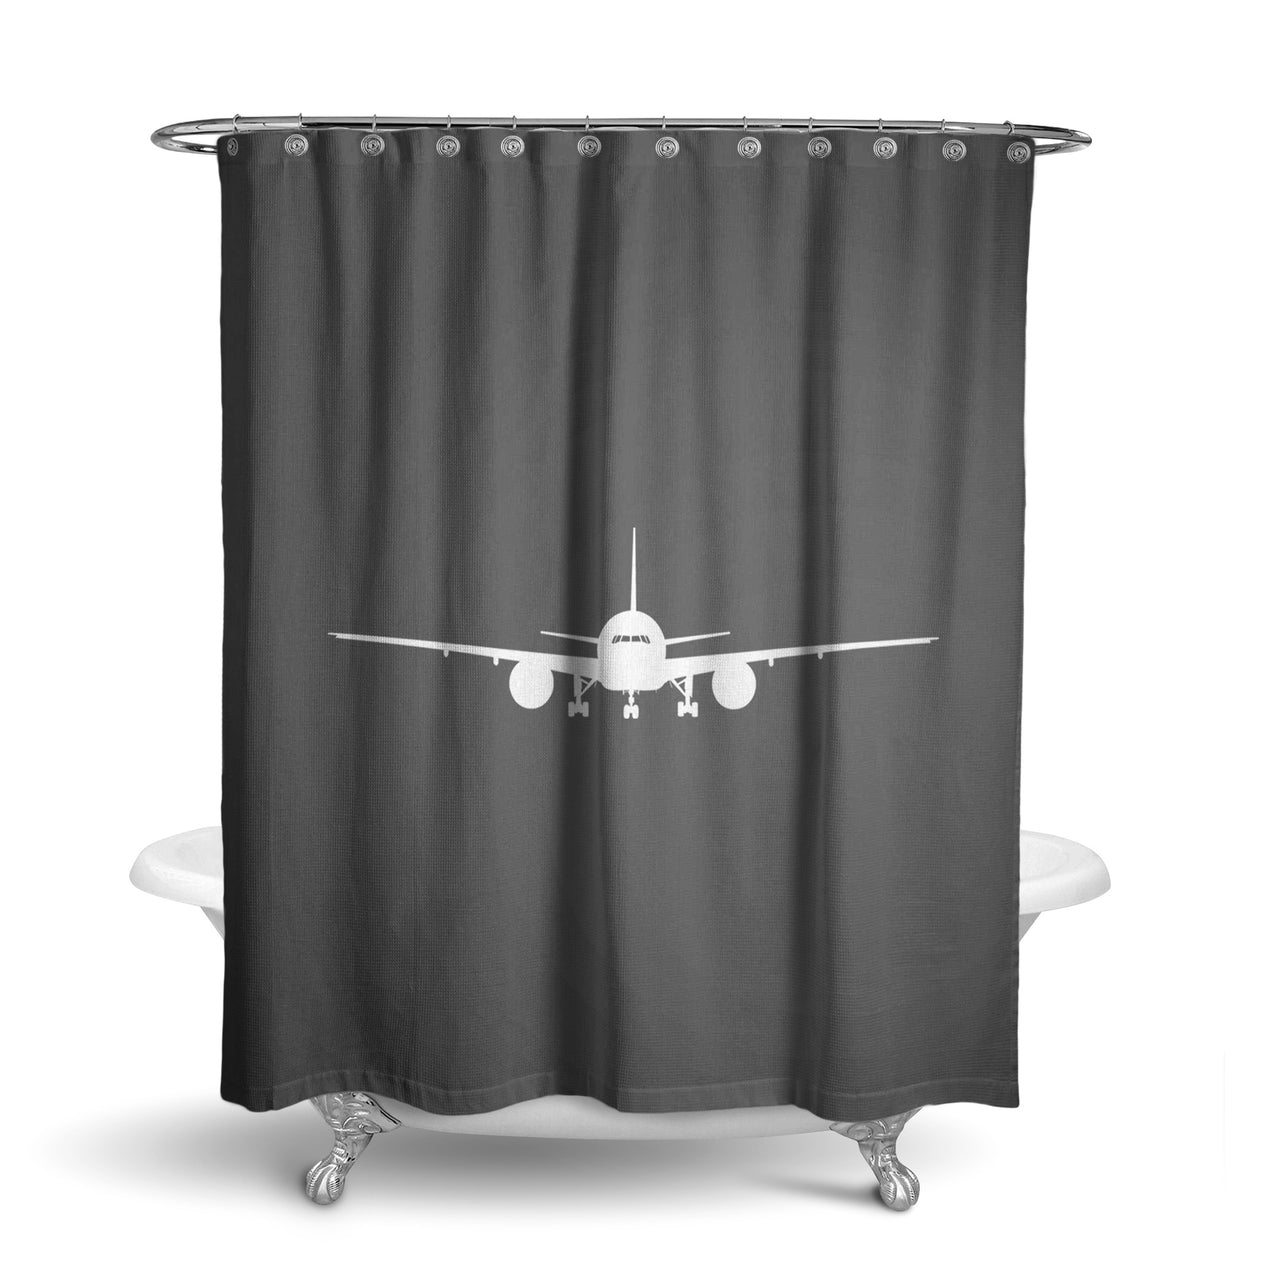 Boeing 777 Silhouette Designed Shower Curtains